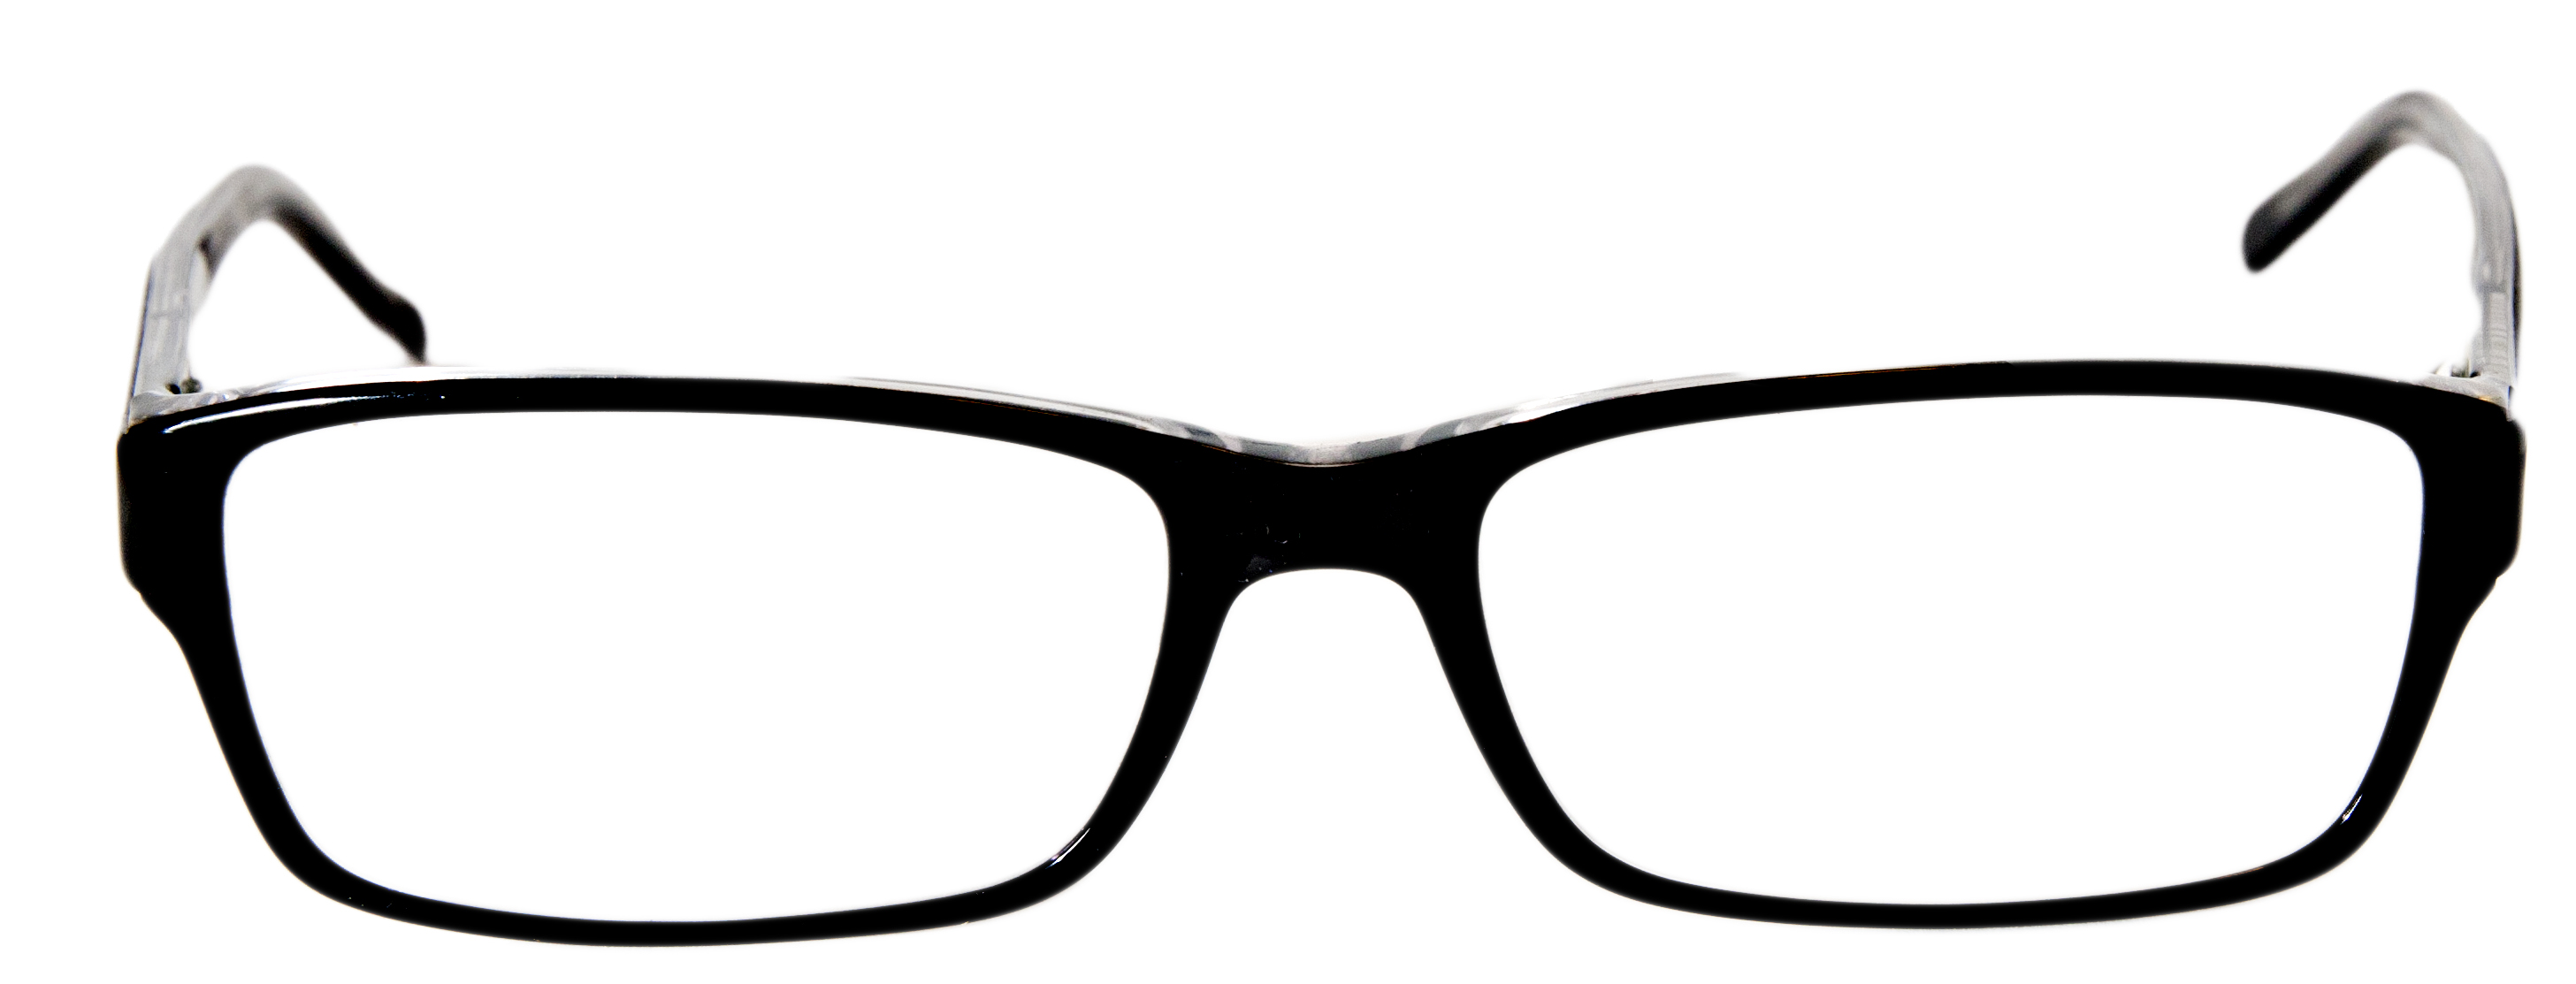 reading glasses png